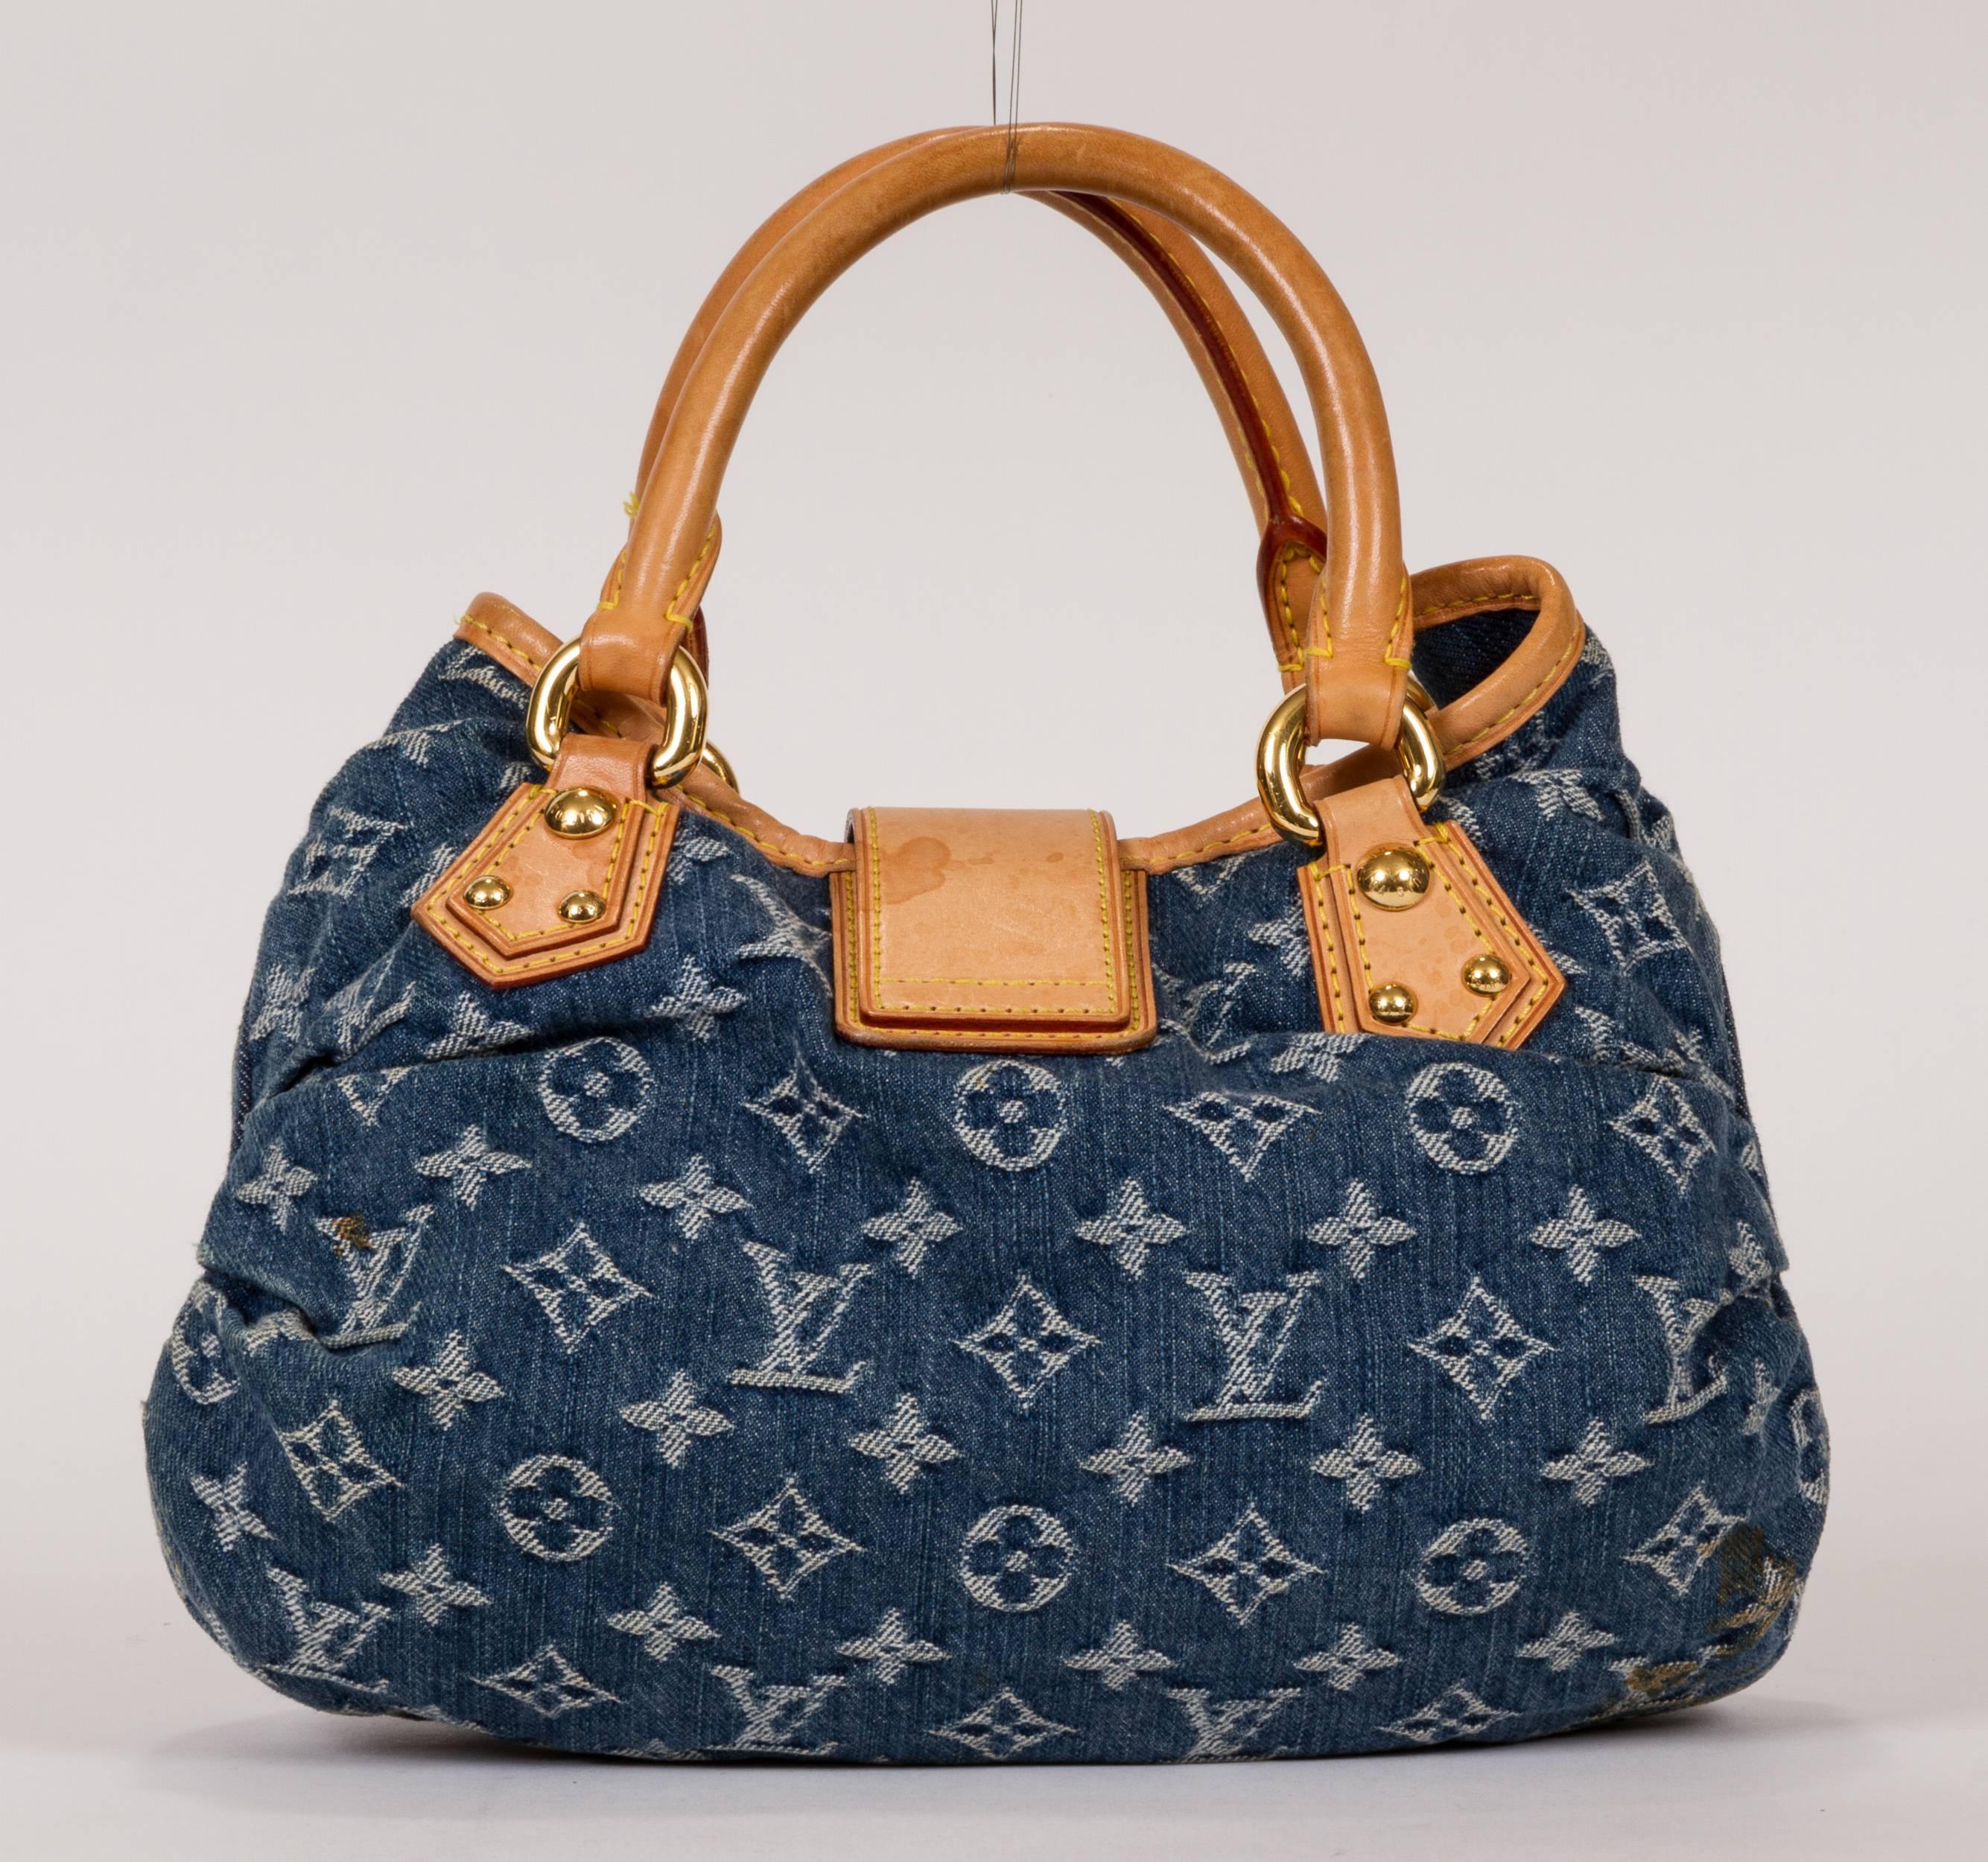 Louis Vuitton blue denim monogram bag. Top strap closure with push lock snap buckle. Stone washed denim with monogram signature logo. Small dark stain on the bottom shown in photo attached. Handles and trim are cowhide leather. Leather shows some